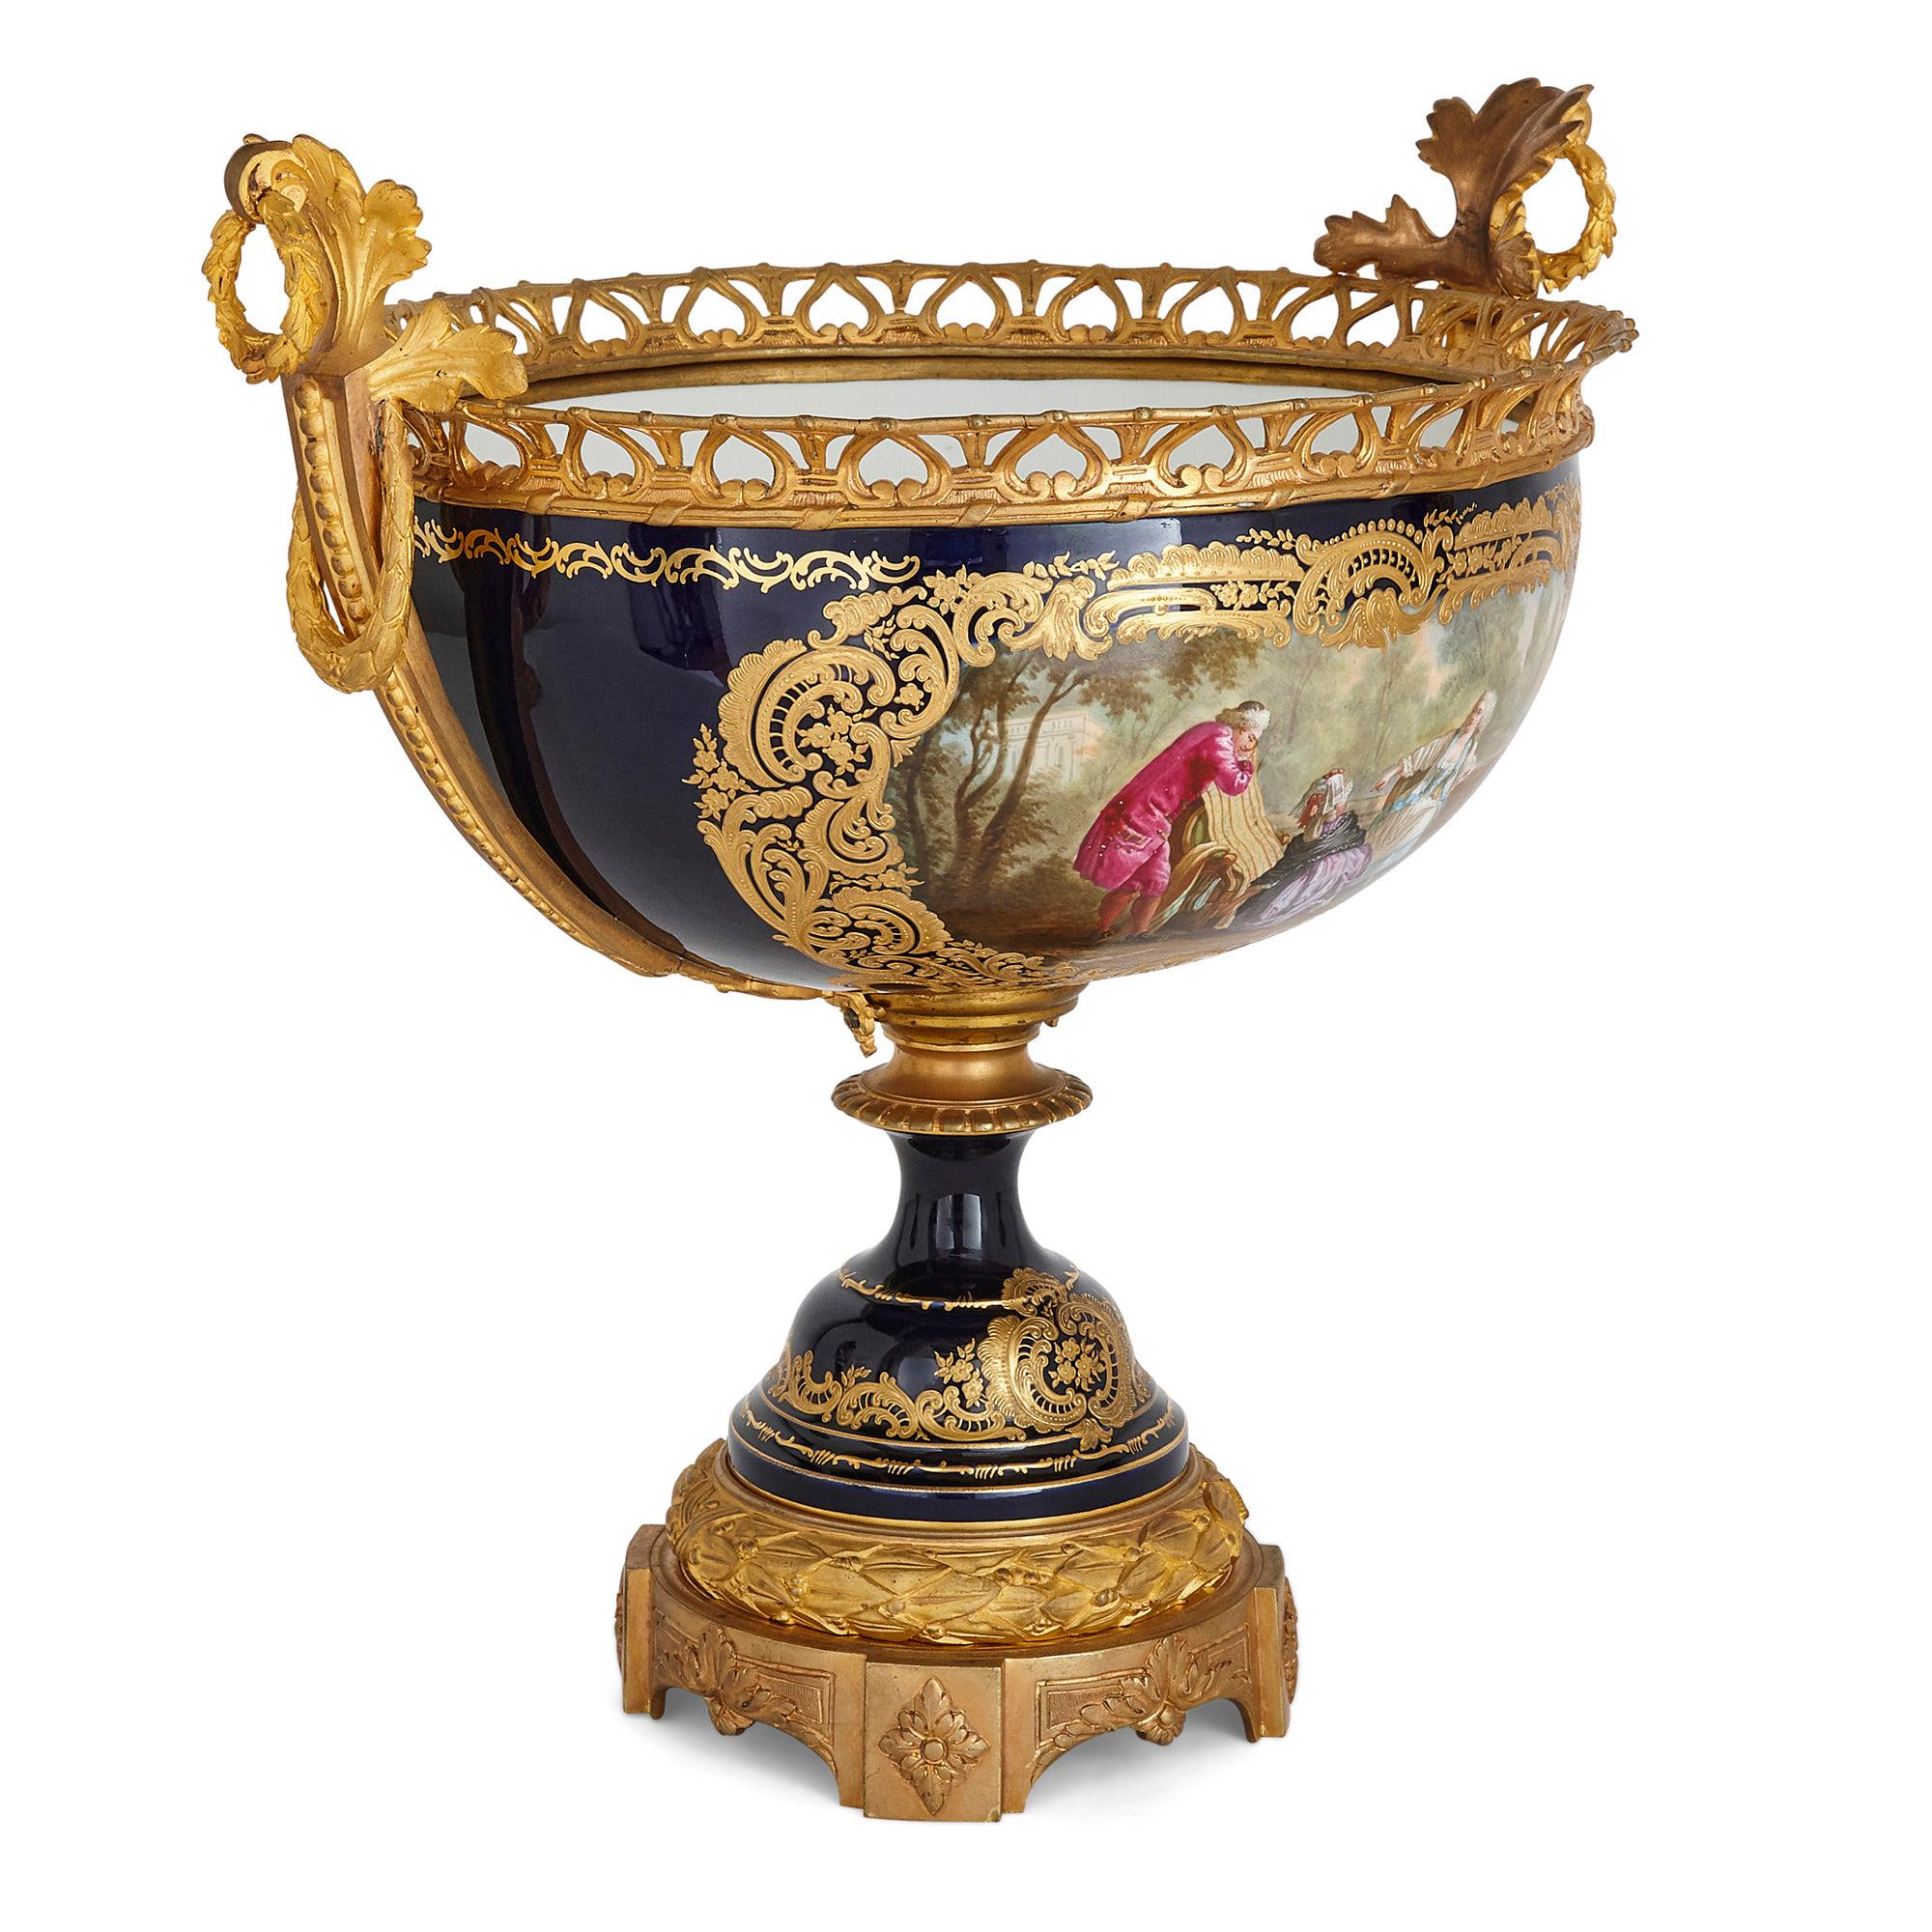 Antique neoclassical Sèvres style porcelain and gilt bronze jardinière and vases
French, 19th century
Measures: Jardinière height 47cm, width 49cm, depth 39cm
Vases height 56cm, width 26cm, depth 19cm

Consisting of a central jardinière and